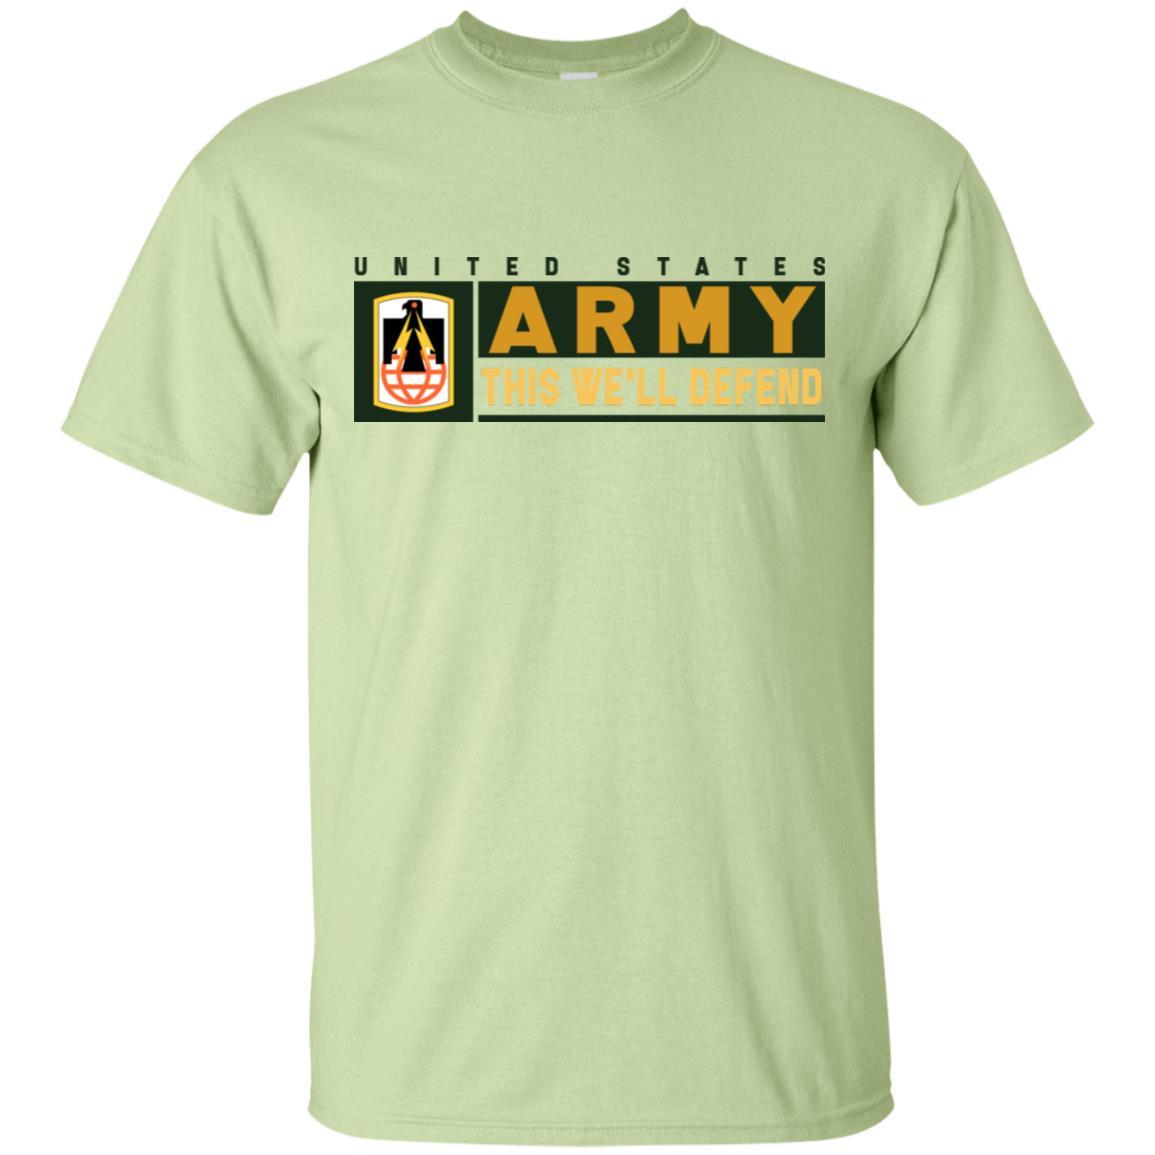 US Army 11TH SIGNAL BRIGADE- This We'll Defend T-Shirt On Front For Men-TShirt-Army-Veterans Nation